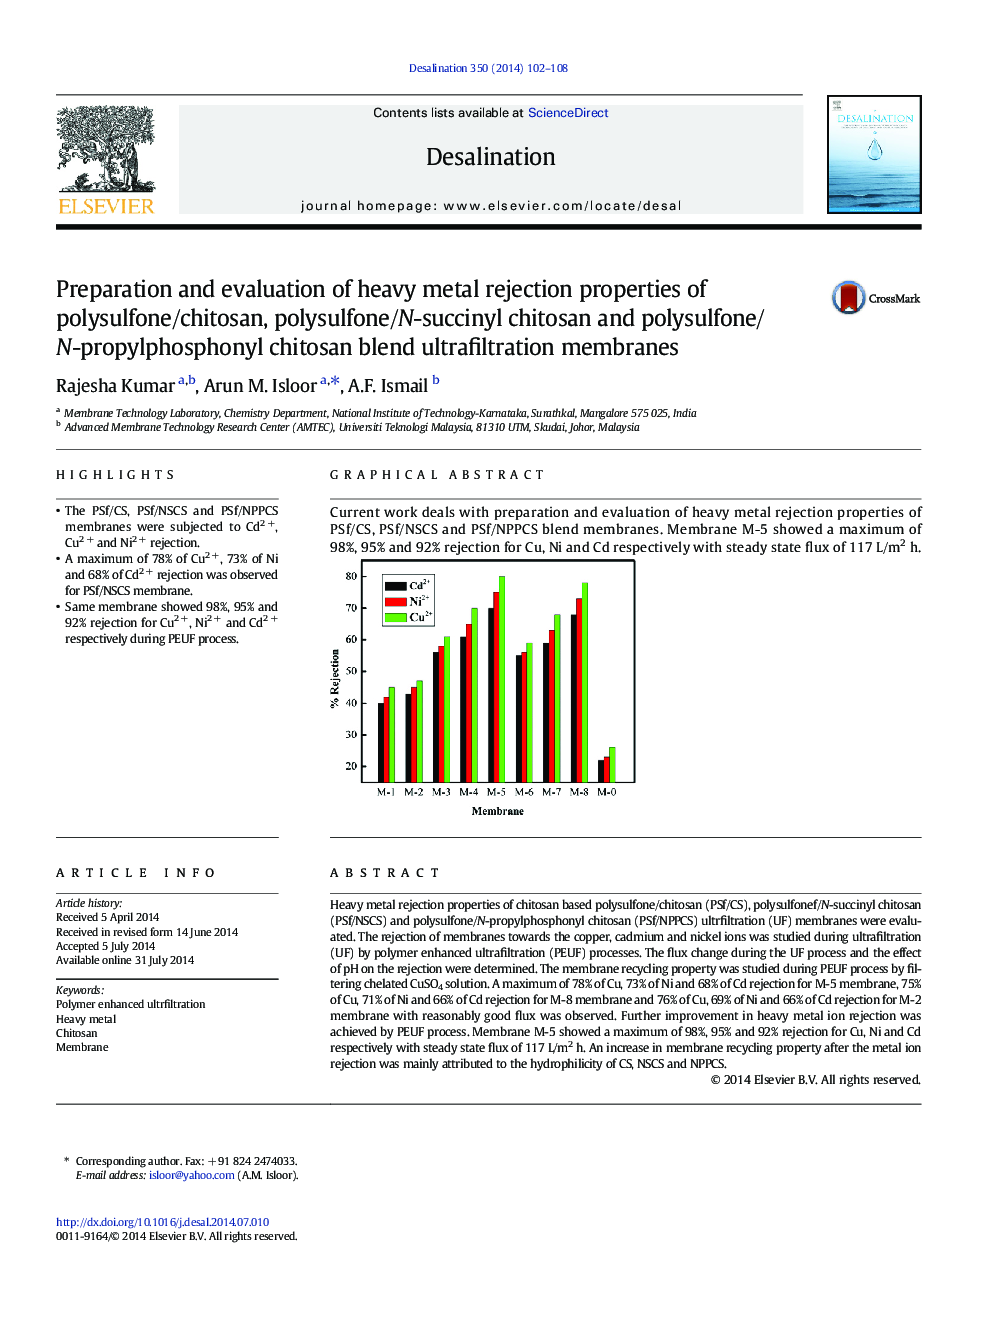 Preparation and evaluation of heavy metal rejection properties of polysulfone/chitosan, polysulfone/N-succinyl chitosan and polysulfone/N-propylphosphonyl chitosan blend ultrafiltration membranes